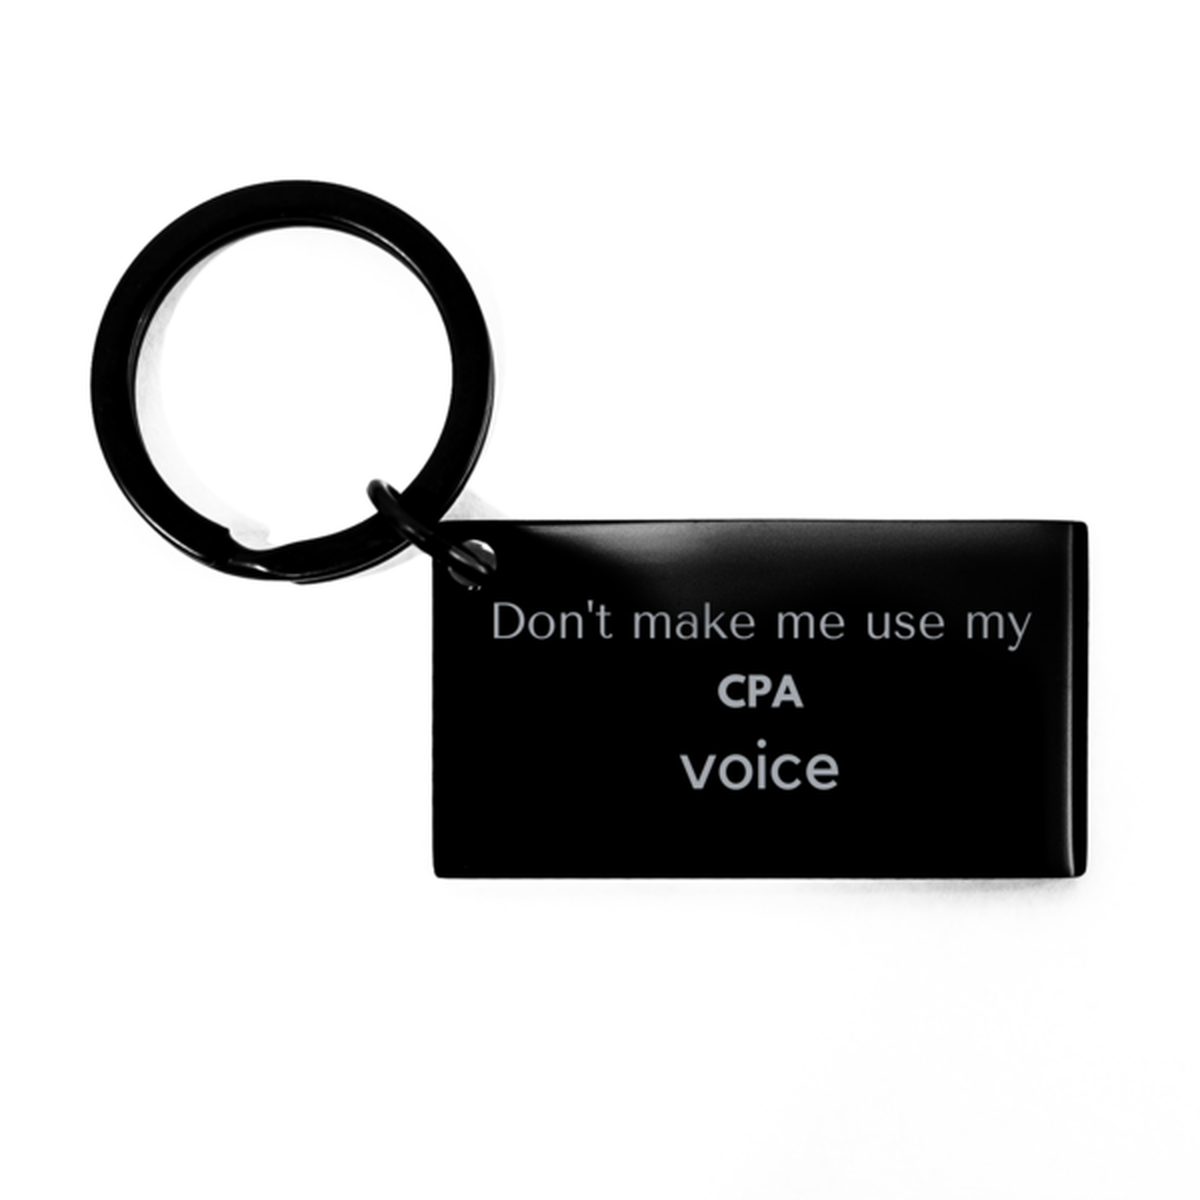 Don't make me use my CPA voice, Sarcasm CPA Gifts, Christmas CPA Keychain Birthday Unique Gifts For CPA Coworkers, Men, Women, Colleague, Friends